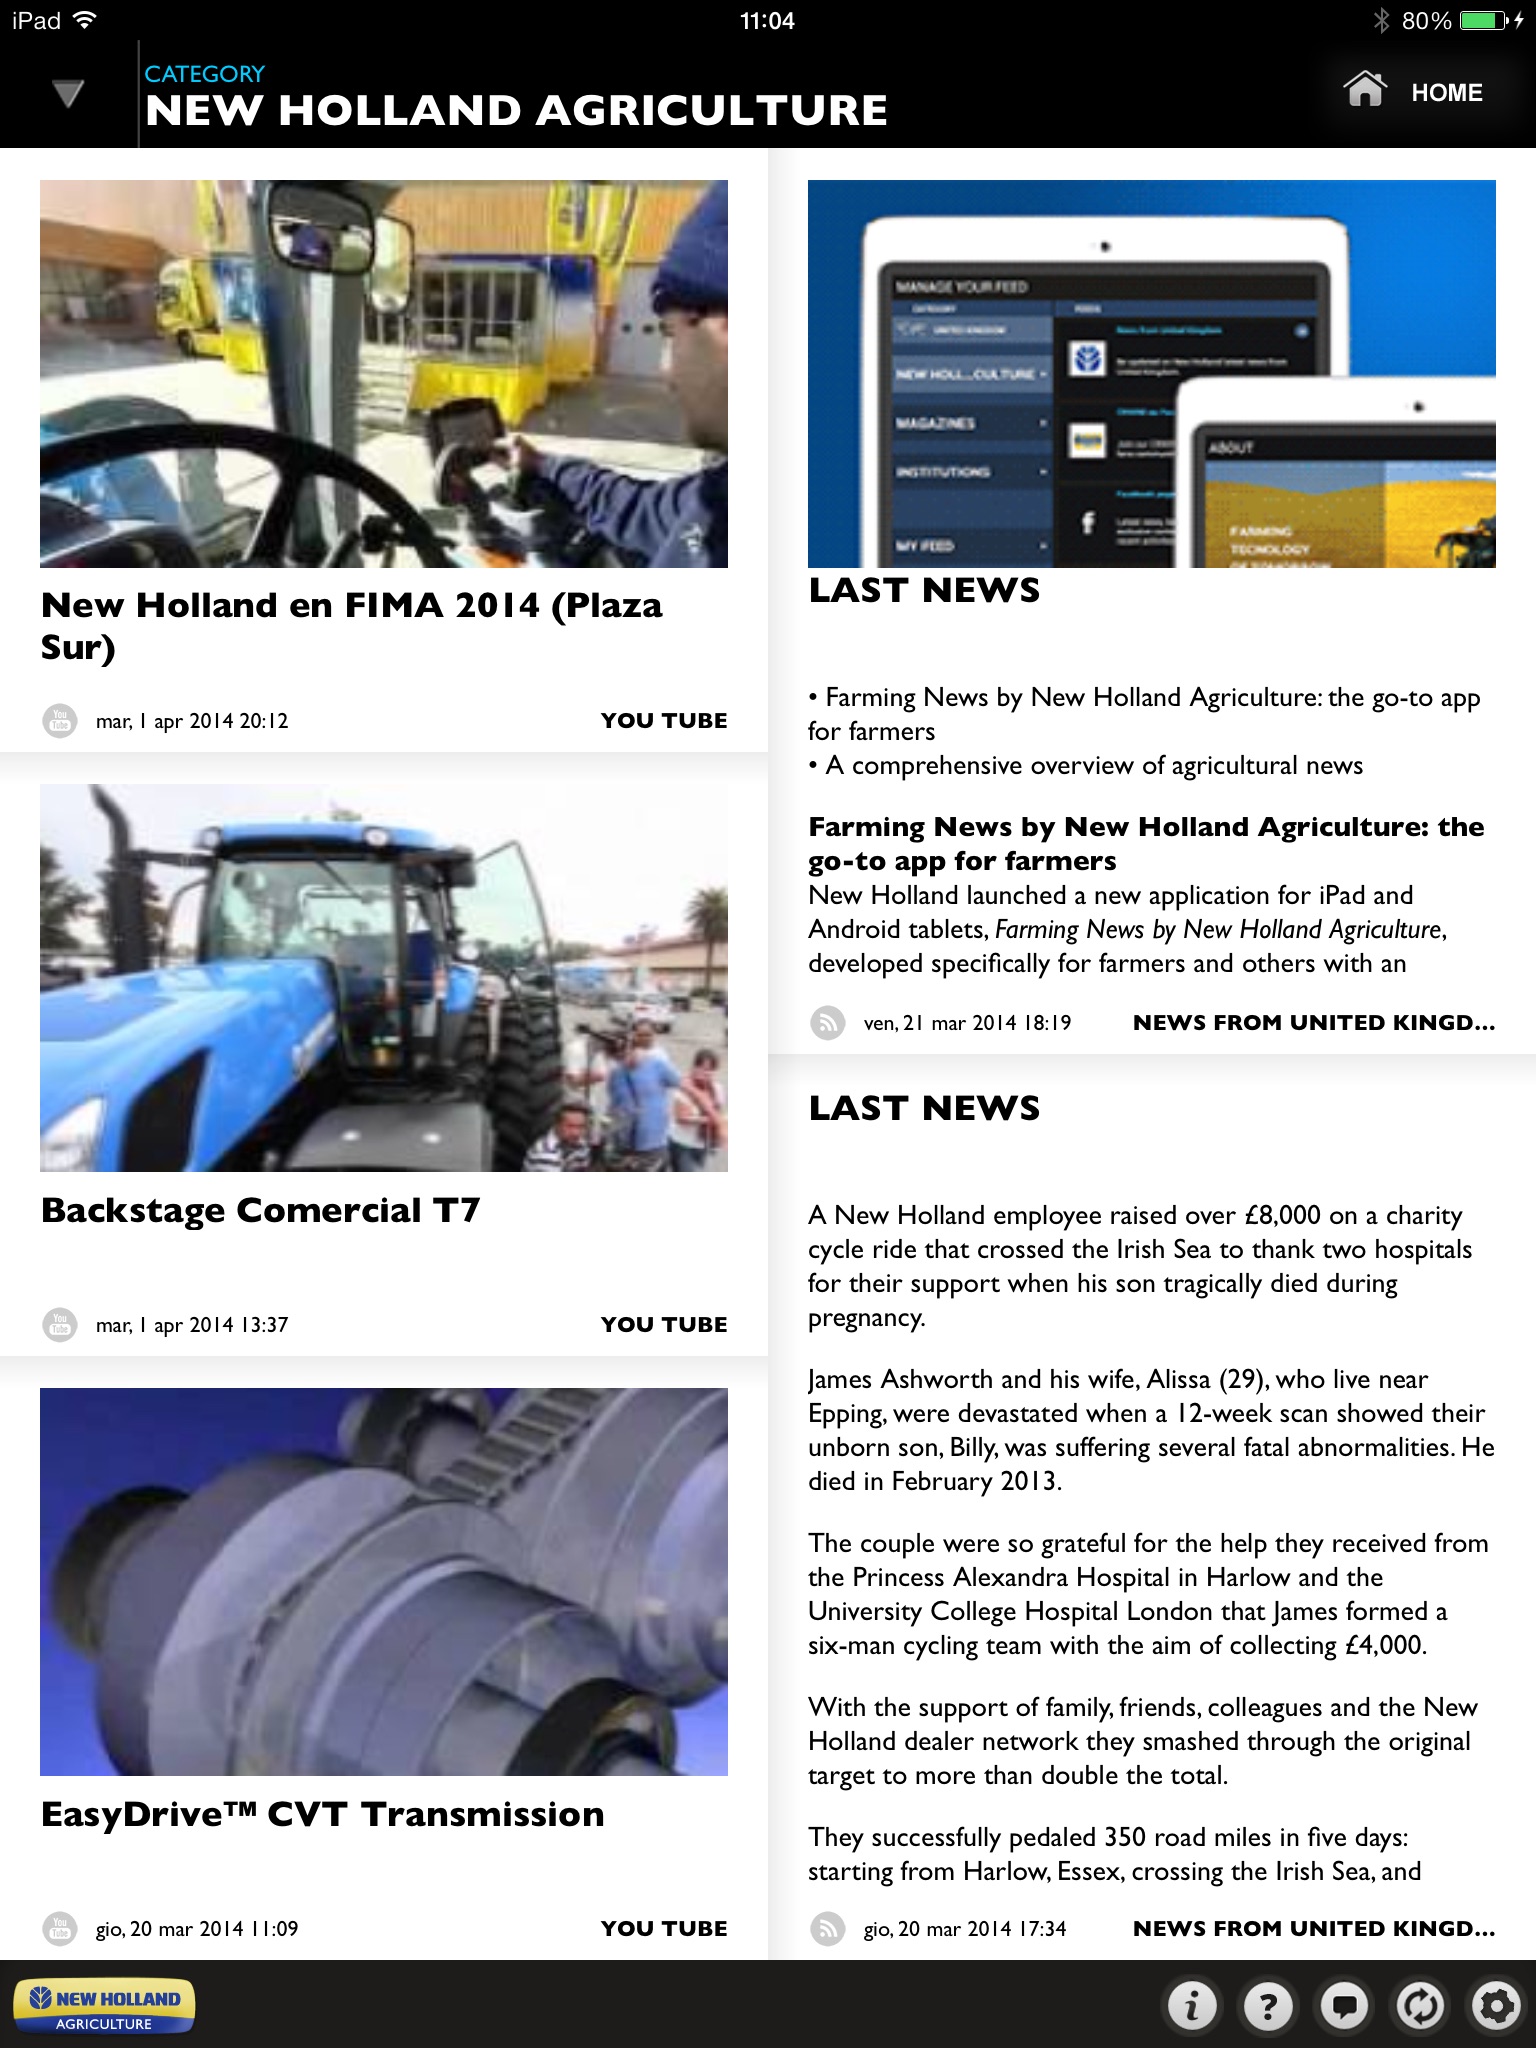 Farming news by New Holland Agriculture screenshot 2